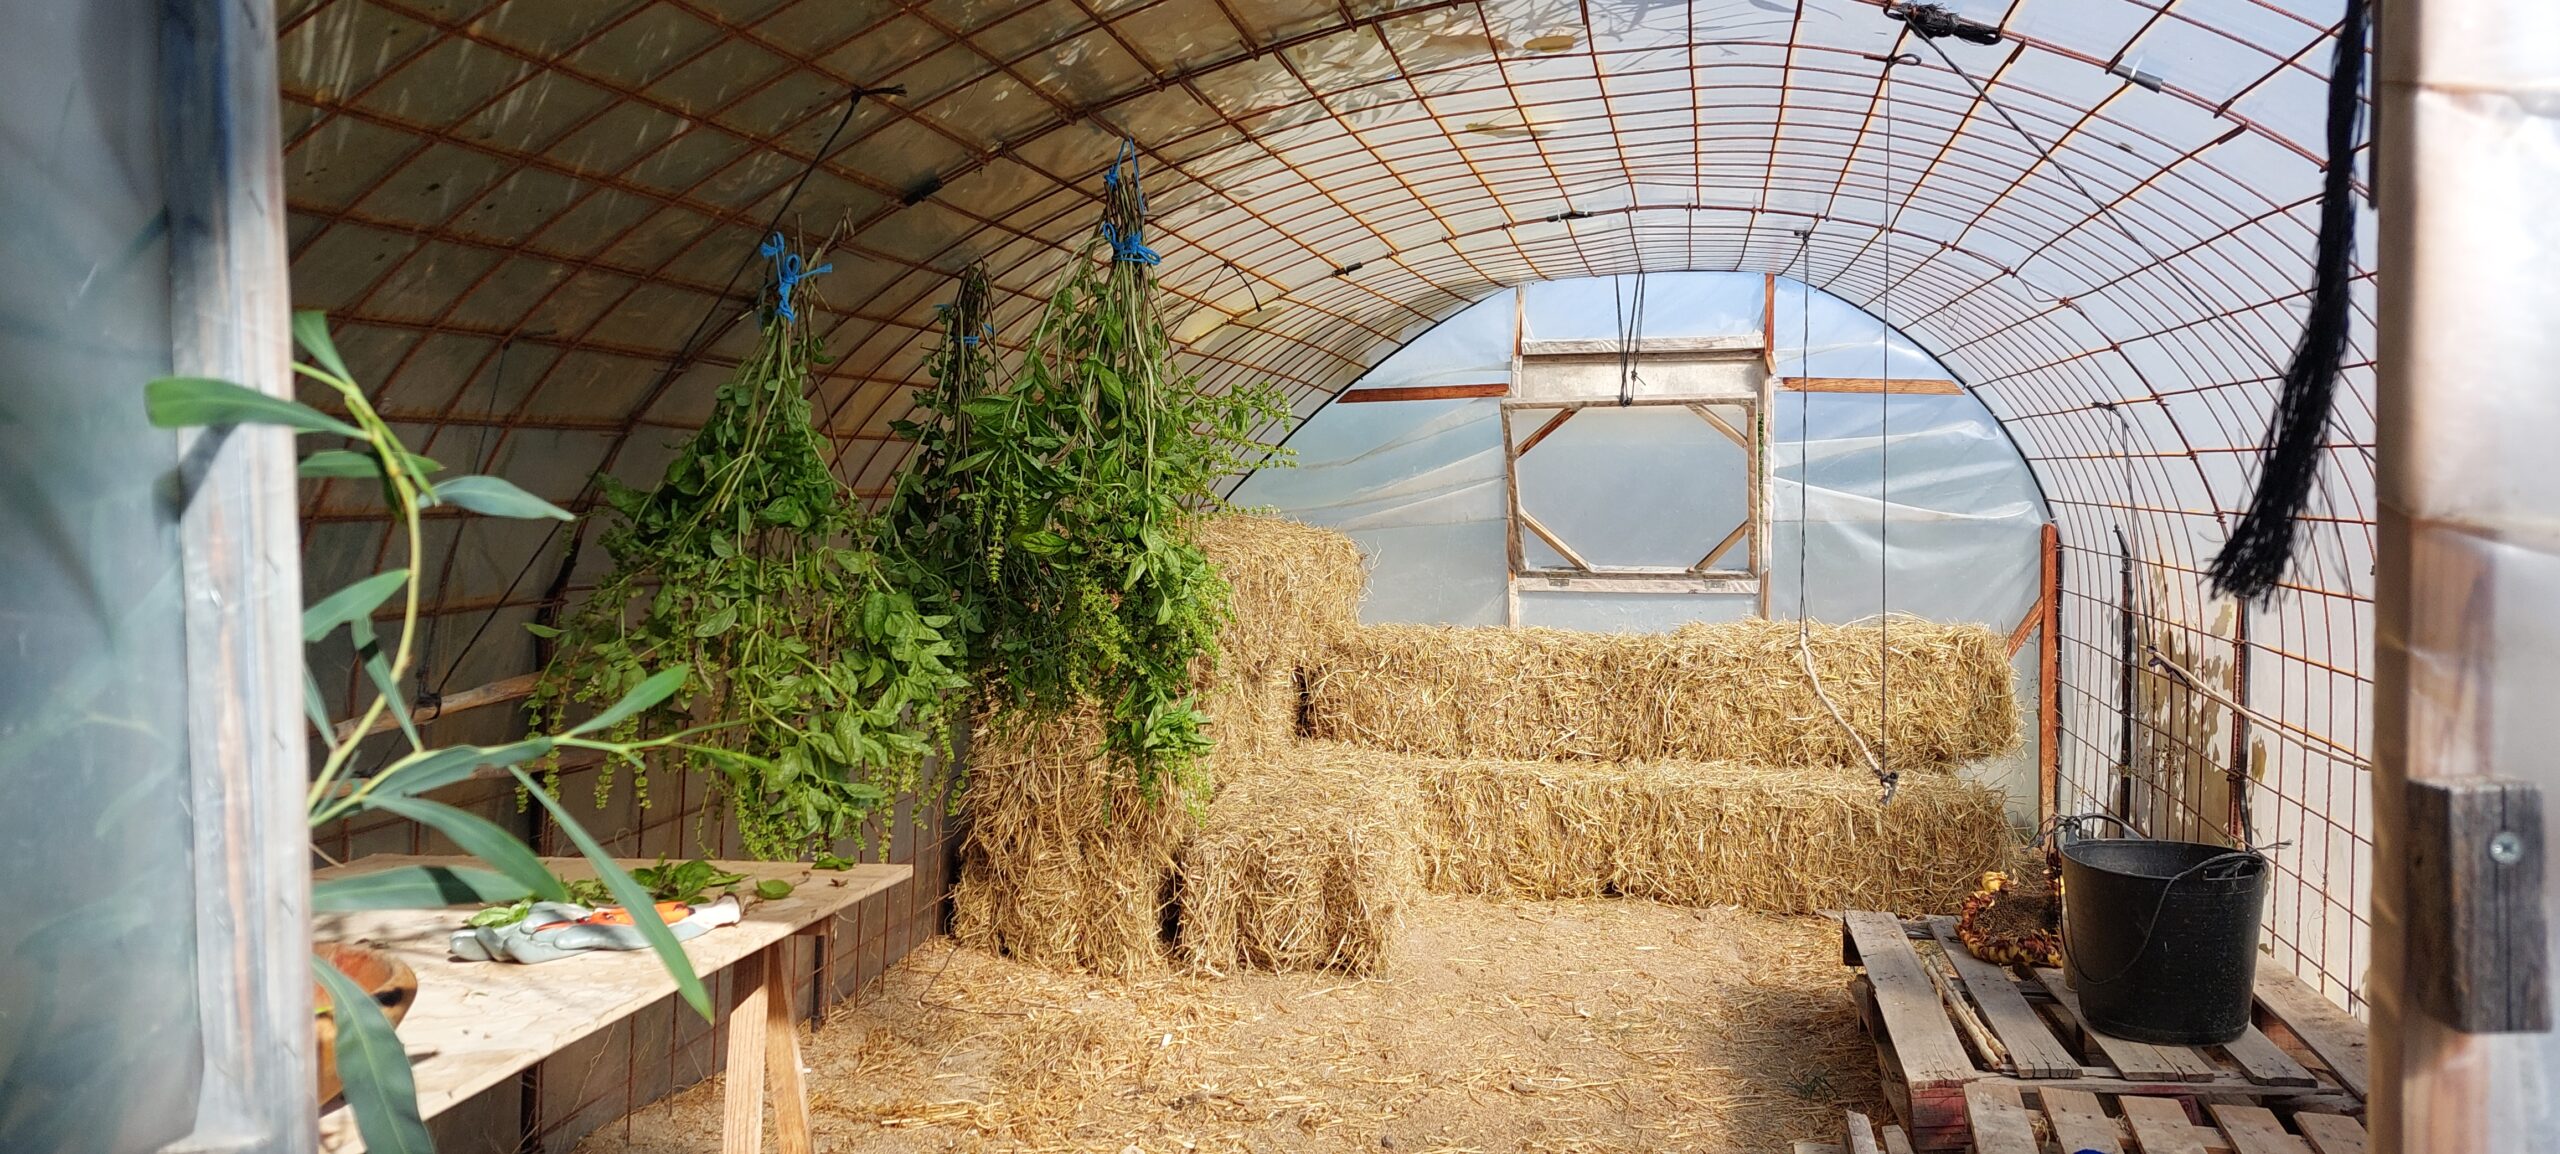 A picture from the inside of a small-scale farm